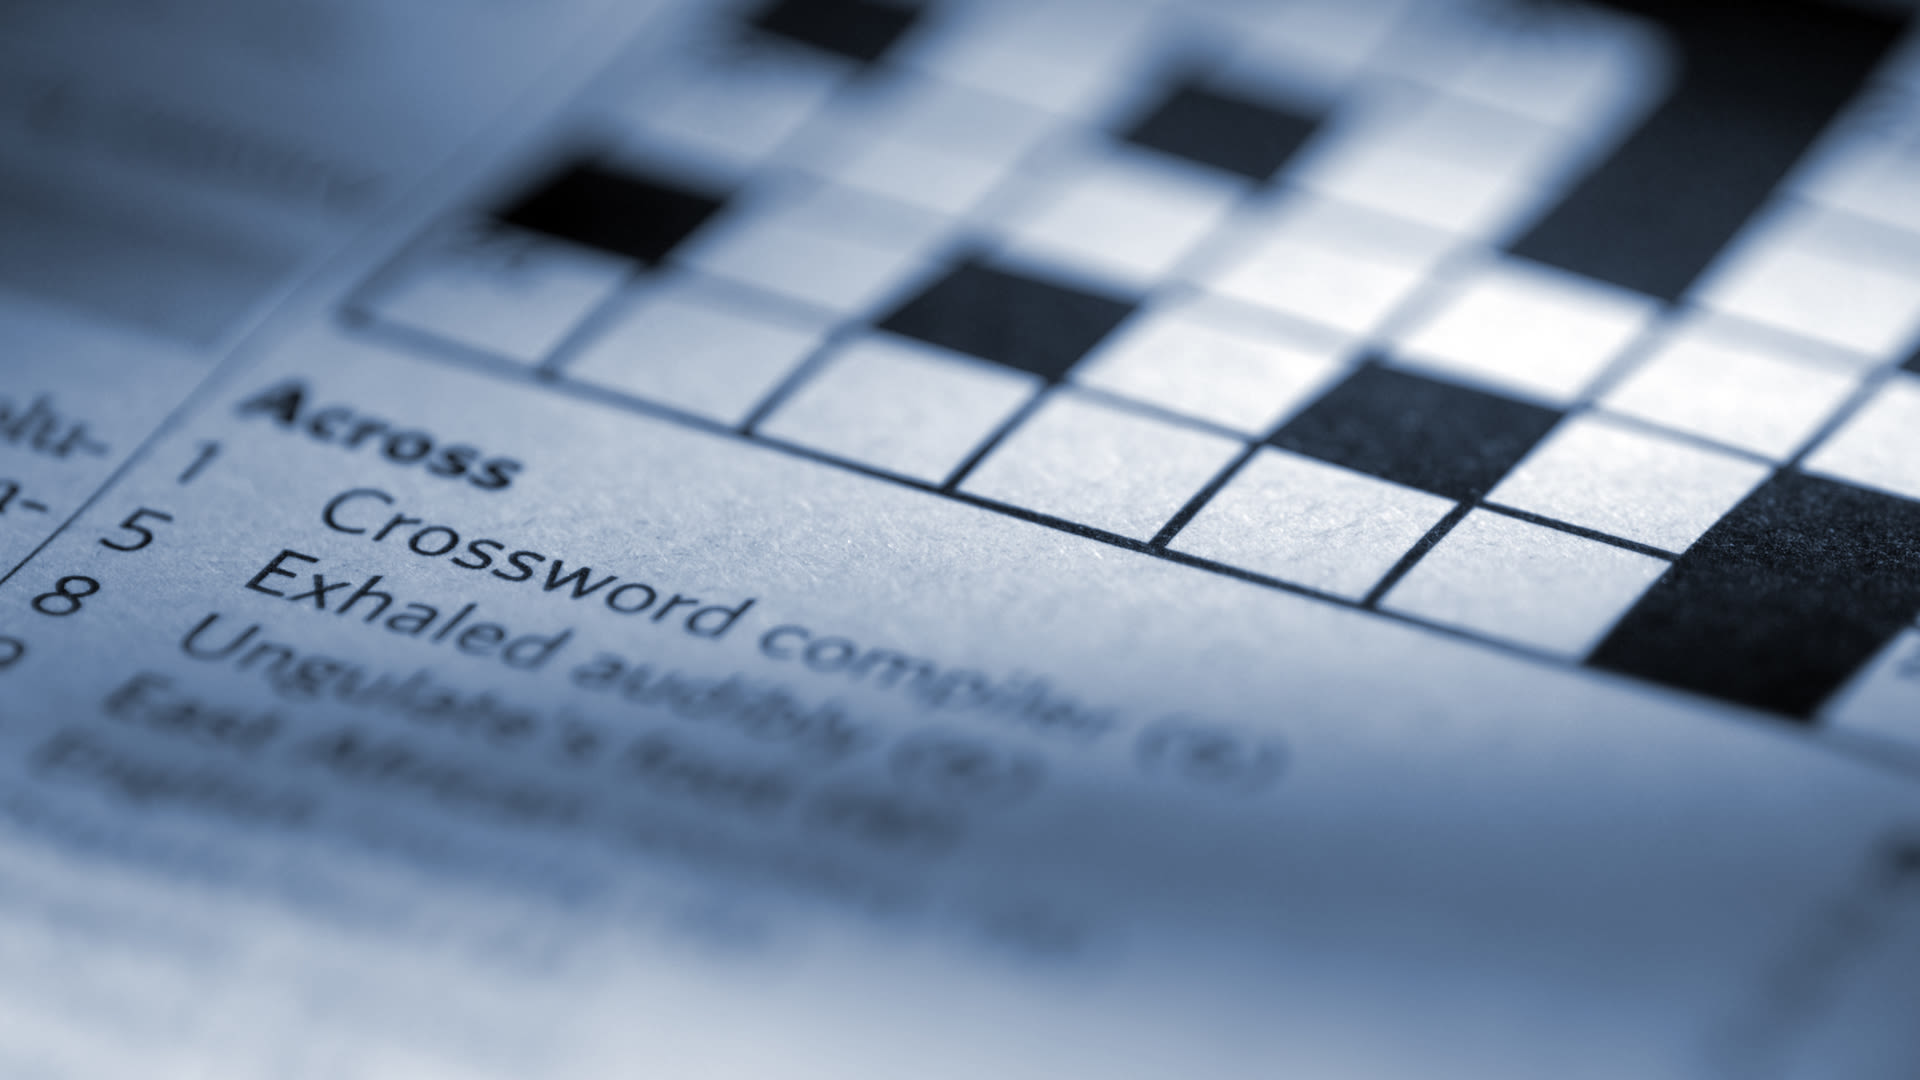 NYT's The Mini crossword answers for August 6